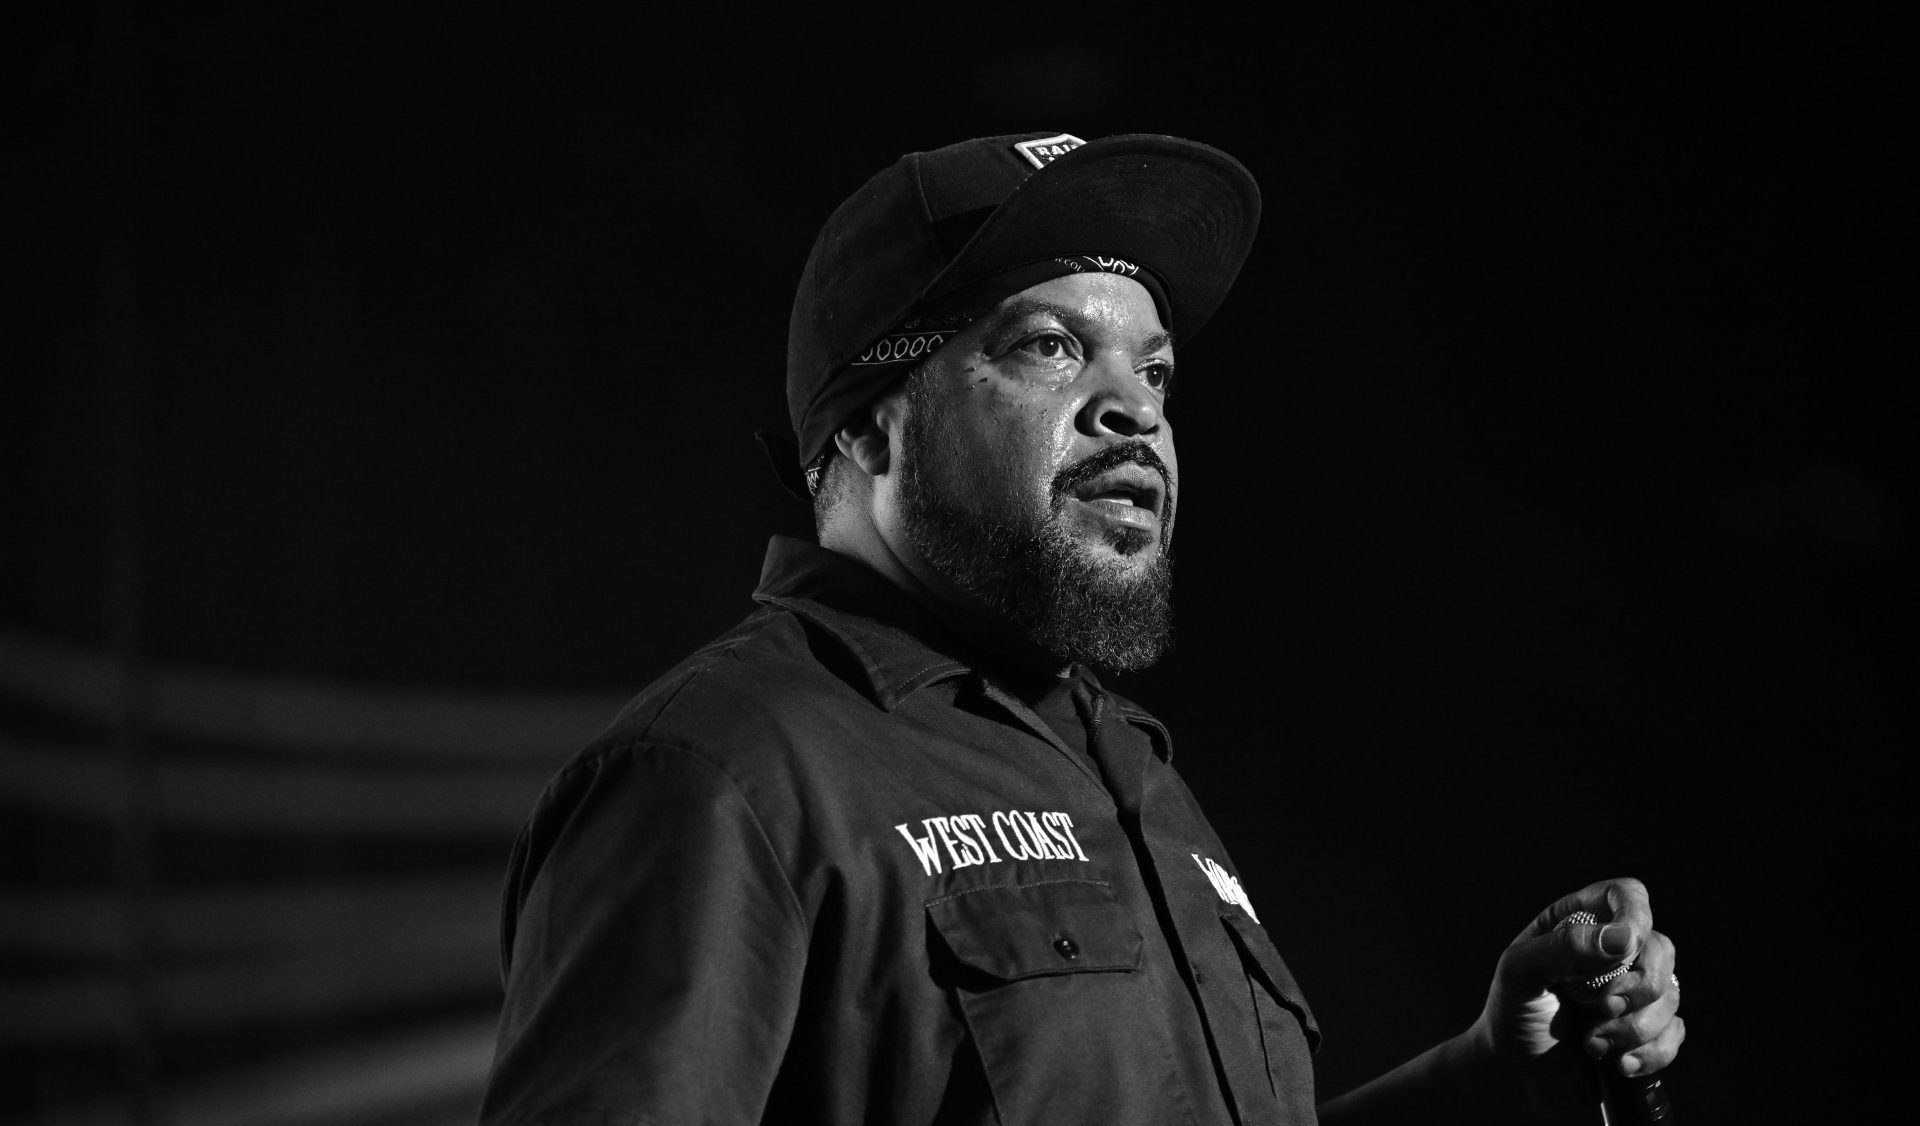 Ice Cube Speaks On What Happened With The Friday Film Franchise Hip Hop Lyrics Being Used In Trials More Exclusive scaled e1691696351794